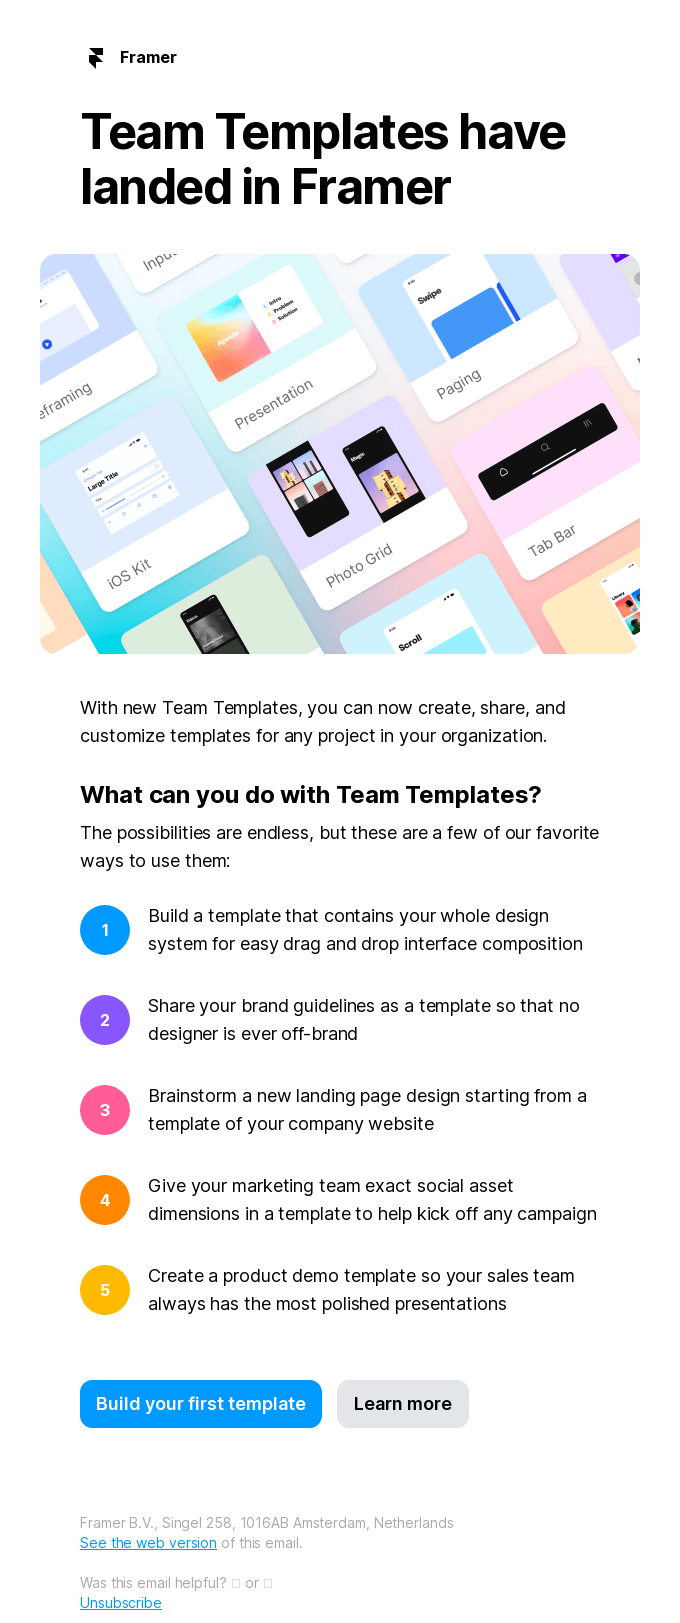 New from Framer: Team Templates for your whole organization